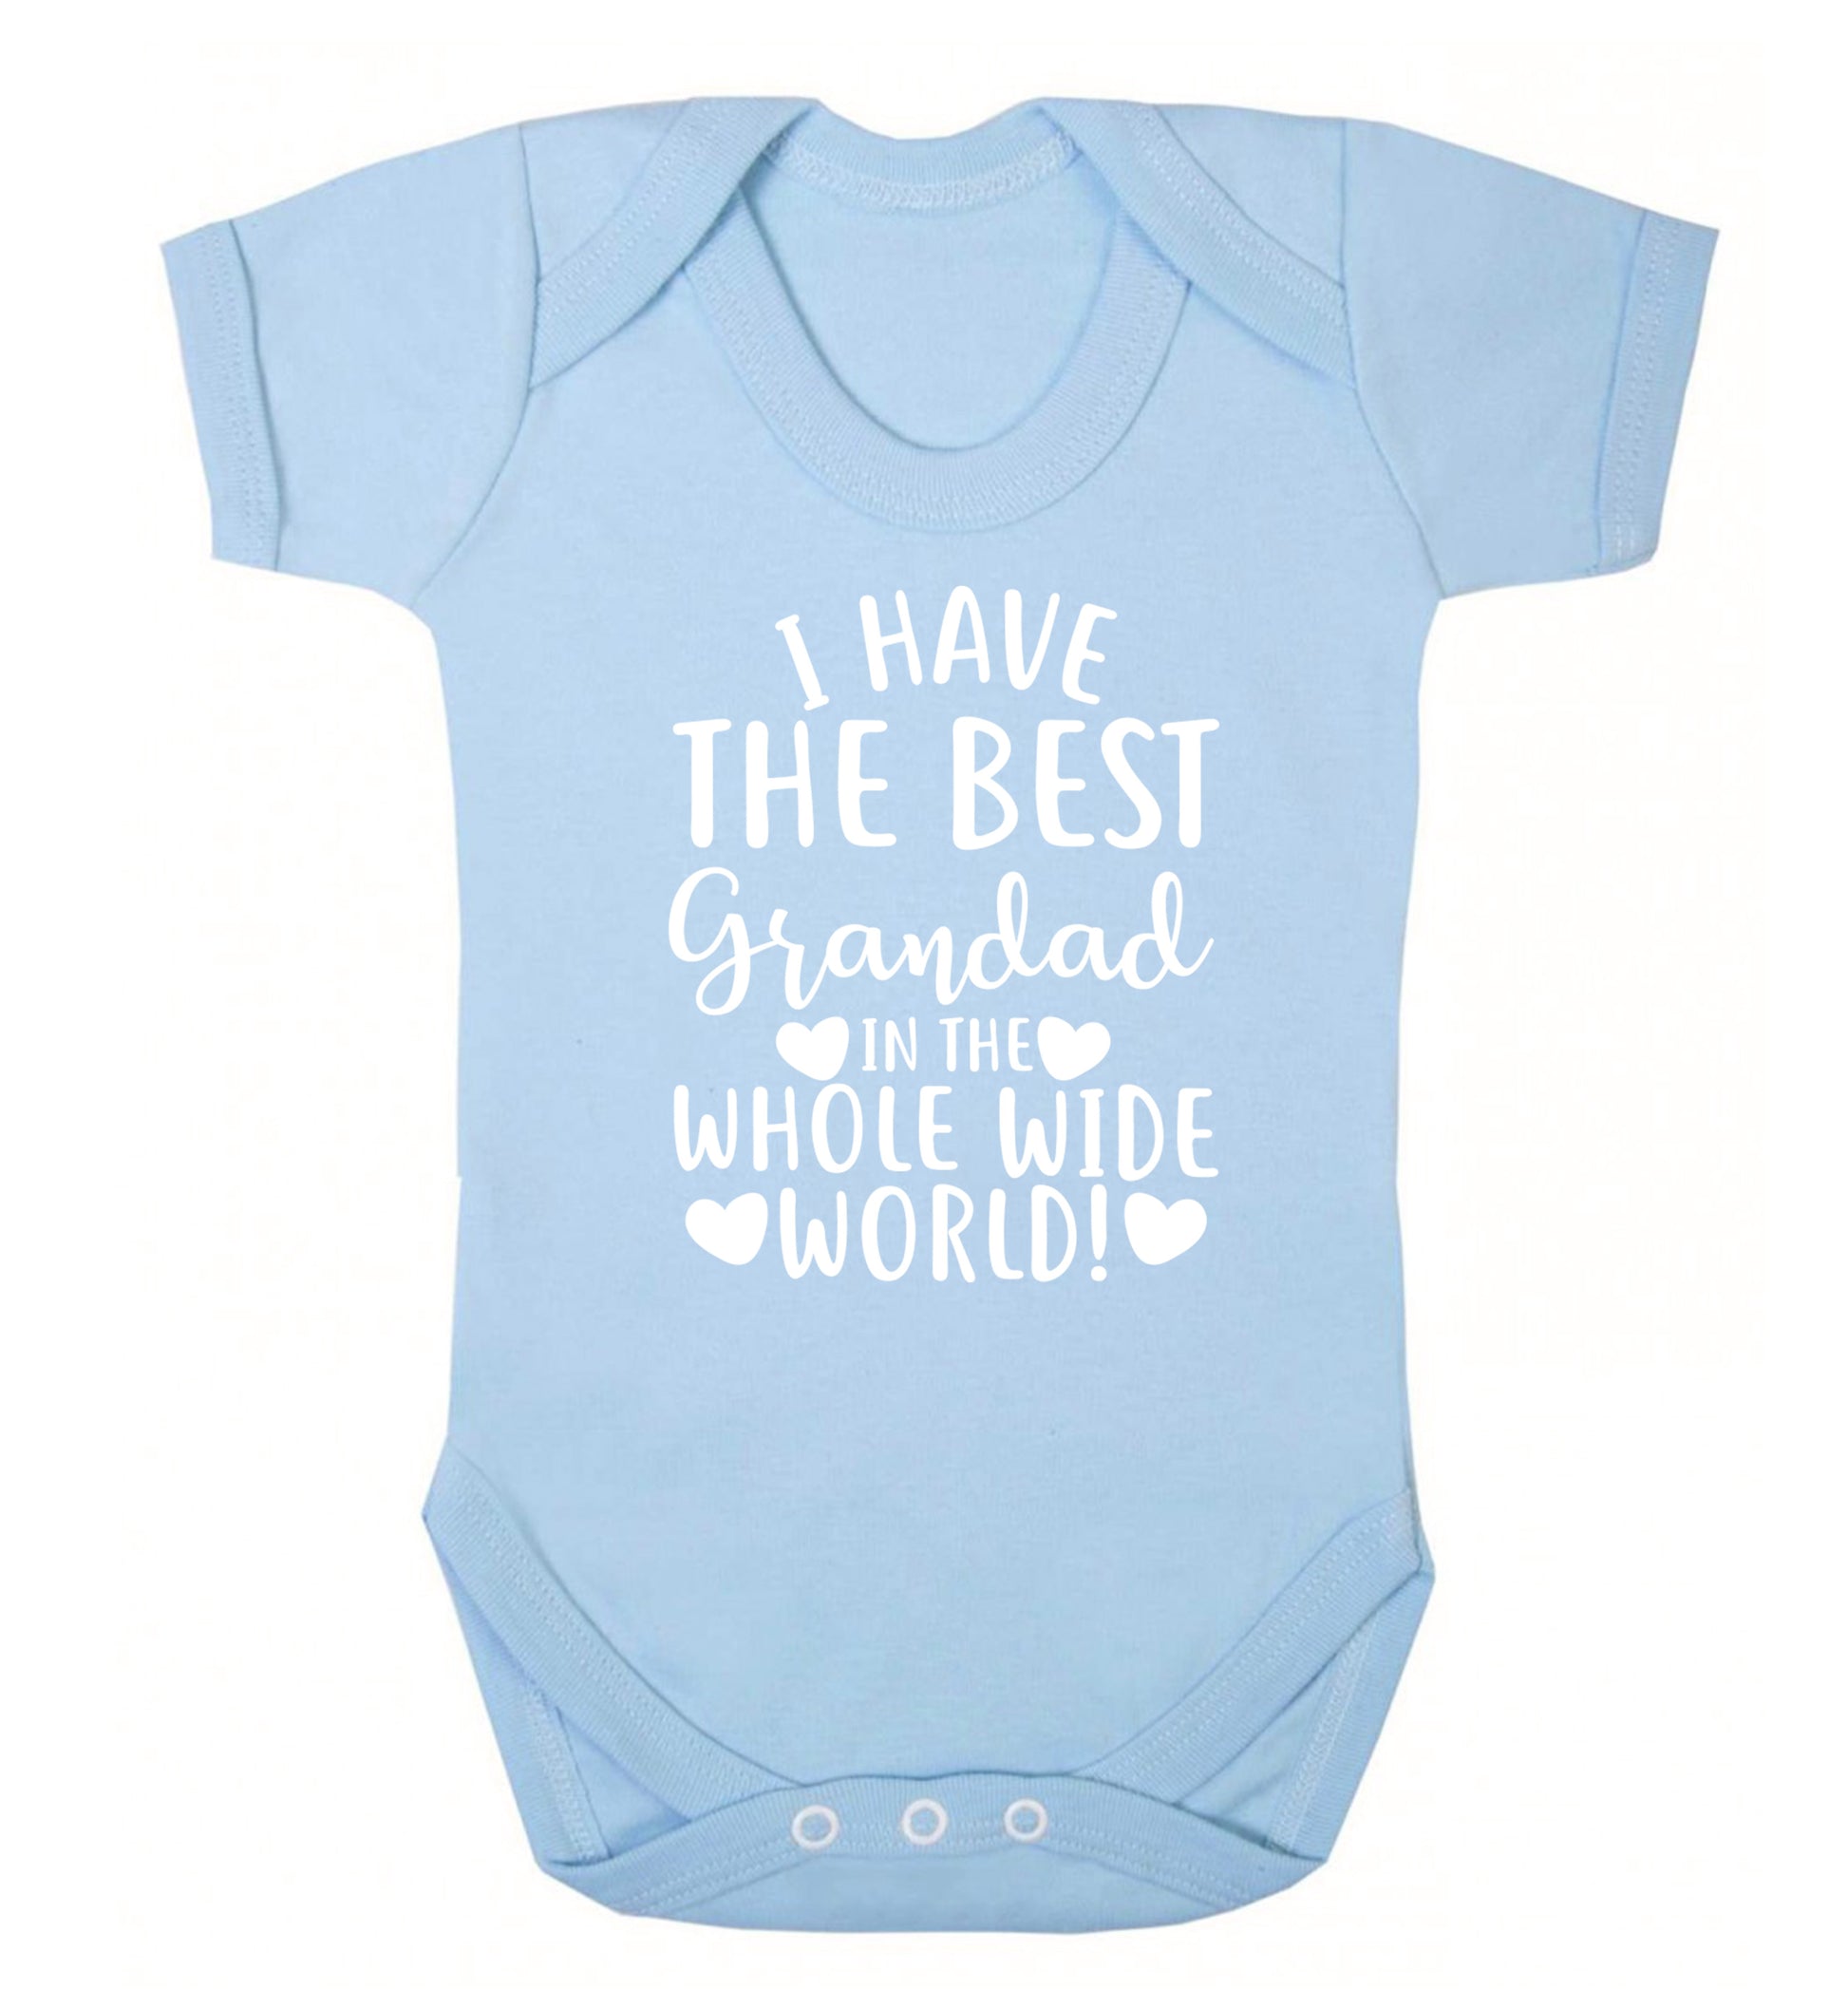 I have the best grandad in the whole wide world! Baby Vest pale blue 18-24 months